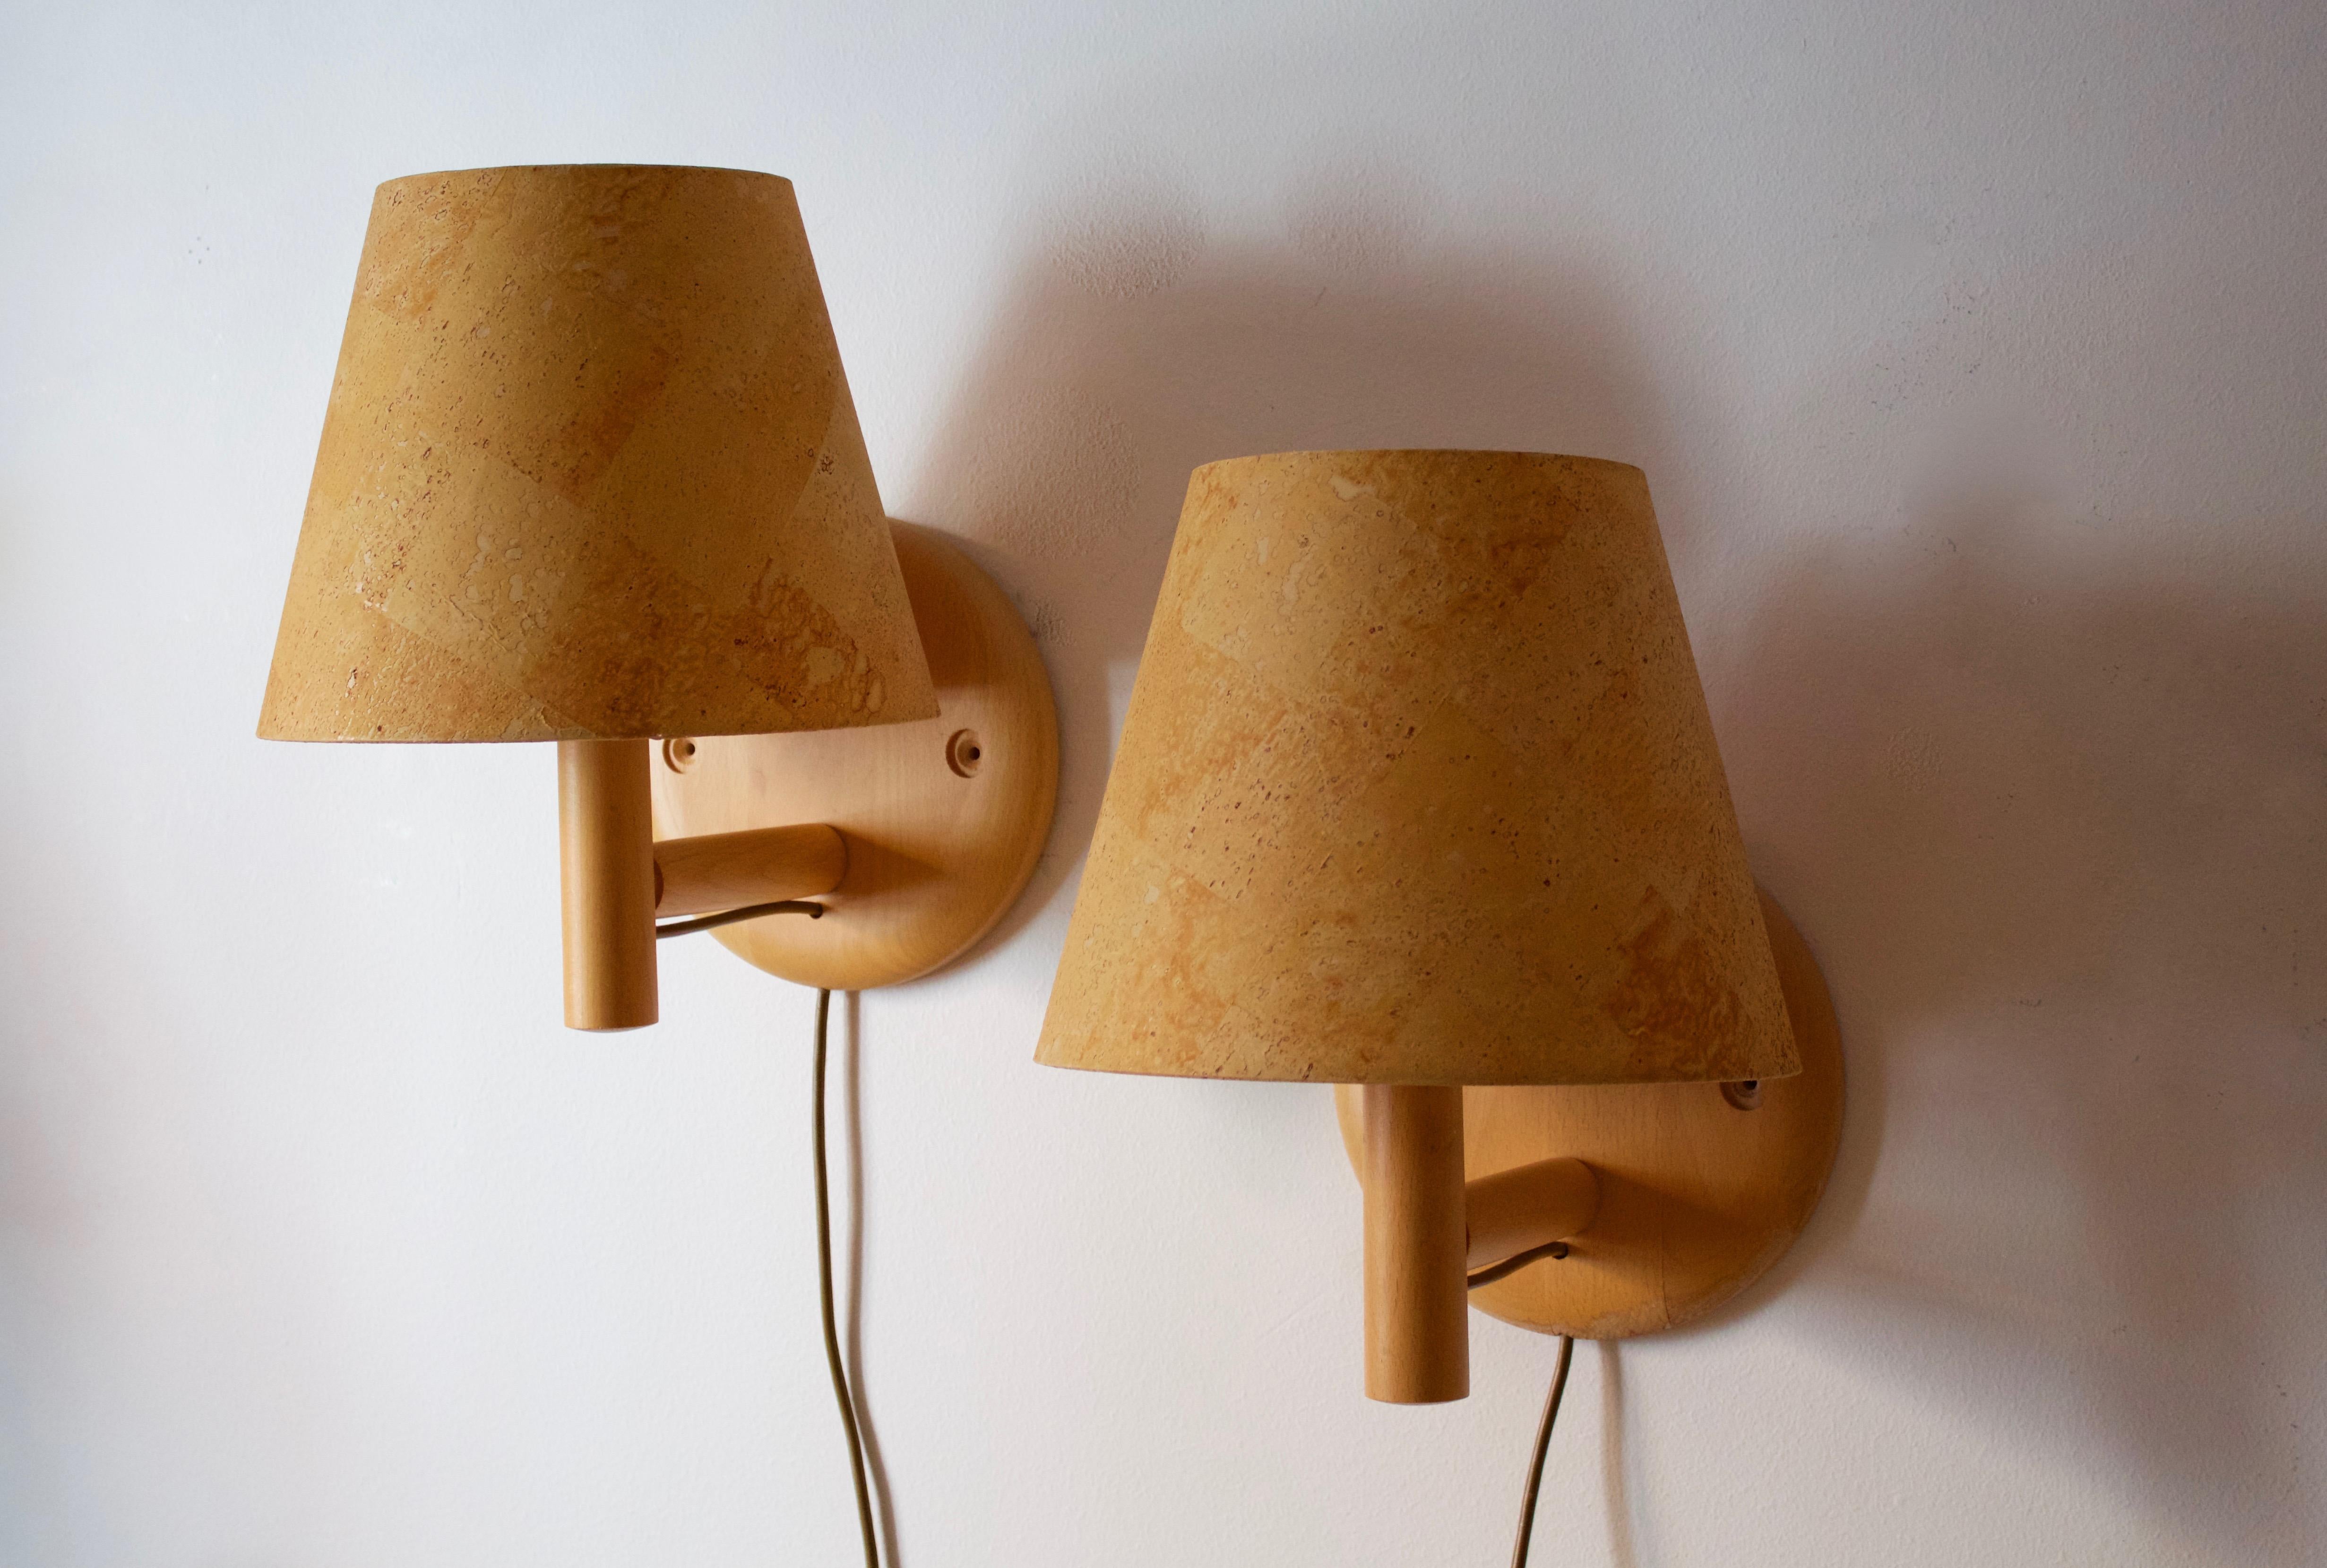 A pair of wall lights / wall sconces. Designed and produced by Bergboms, Sweden, 1960s. Labeled.

Features its original faux cork veneer lampshades.

Other designers of the period include Paavo Tynell, Hans Bergström, Josef Frank, and Kaare